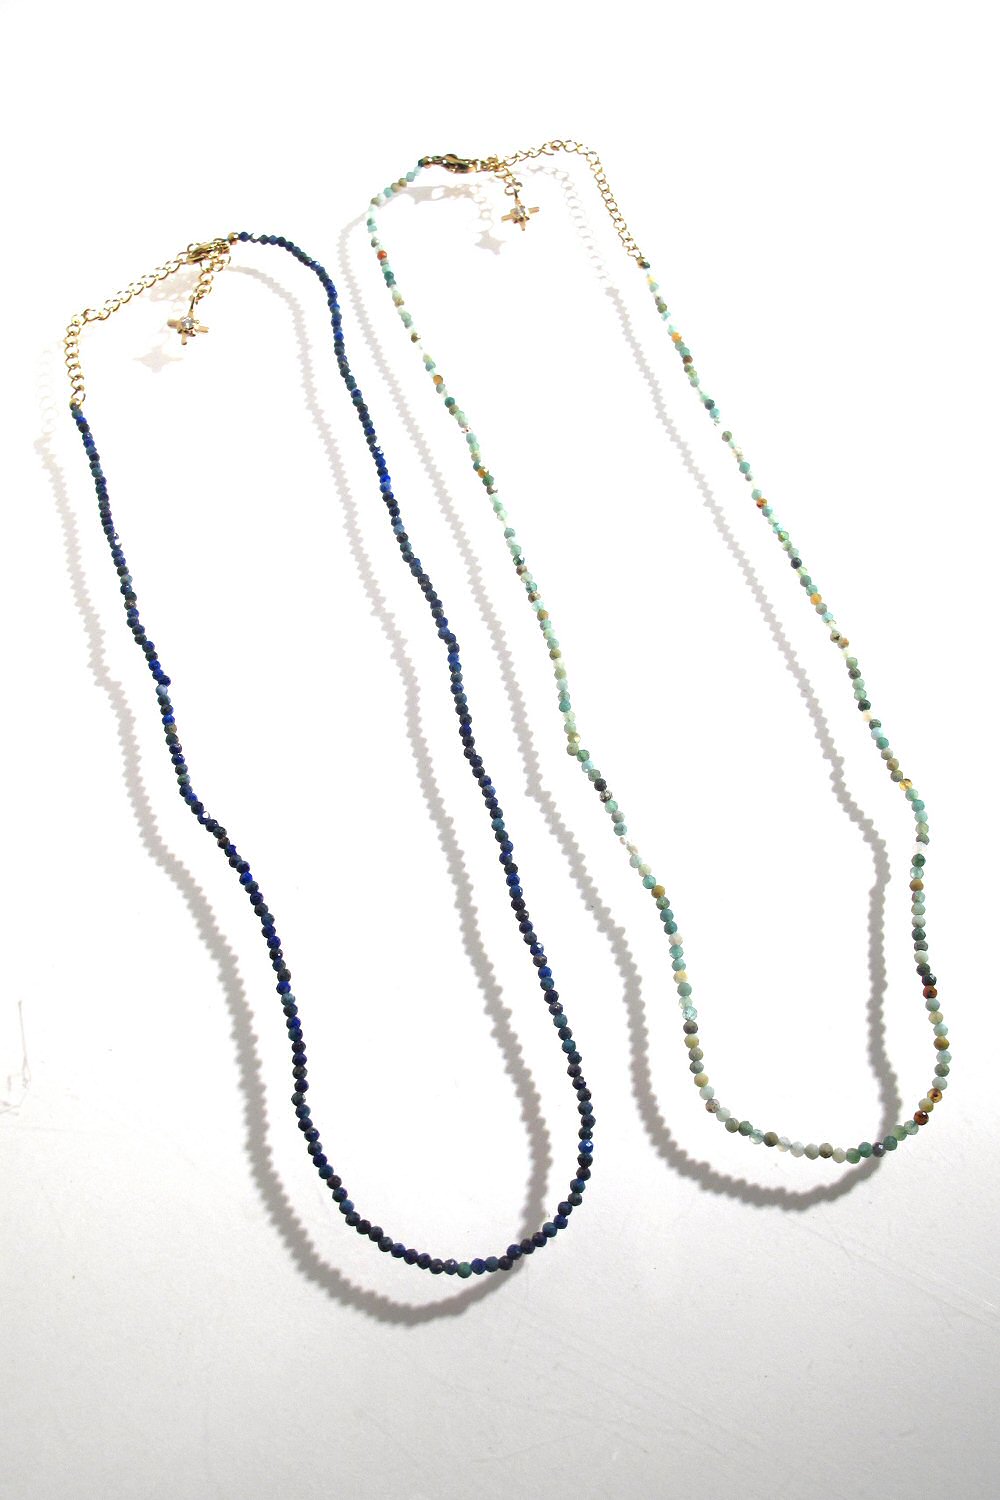 Bali Temples collier Beads Mini perles bleues